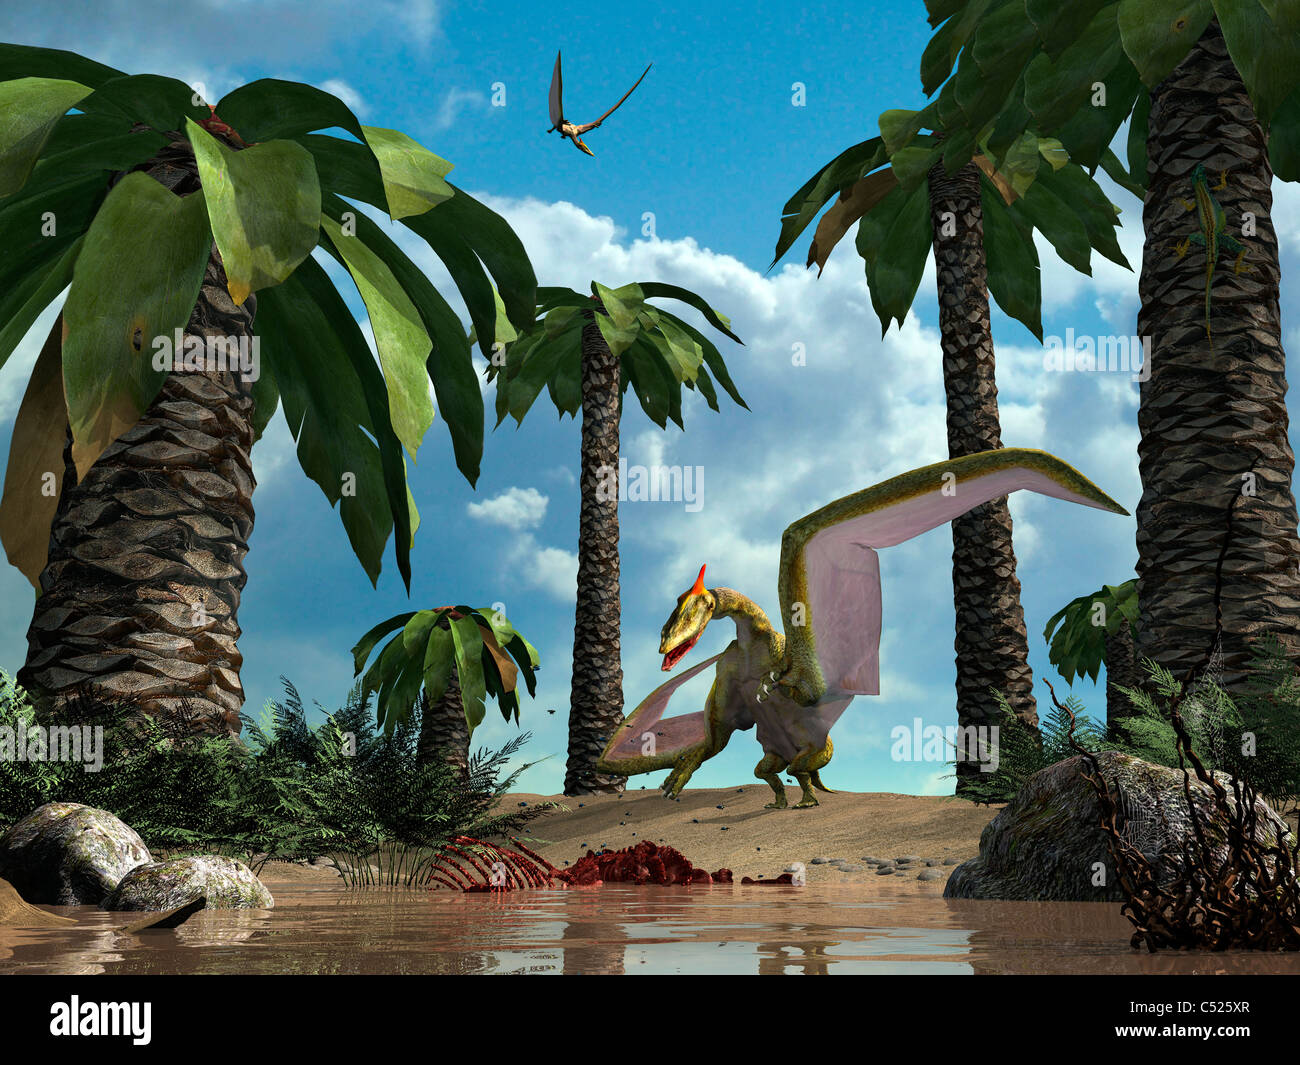 A pterosaur flying reptile lands next to some carrion. Stock Photo